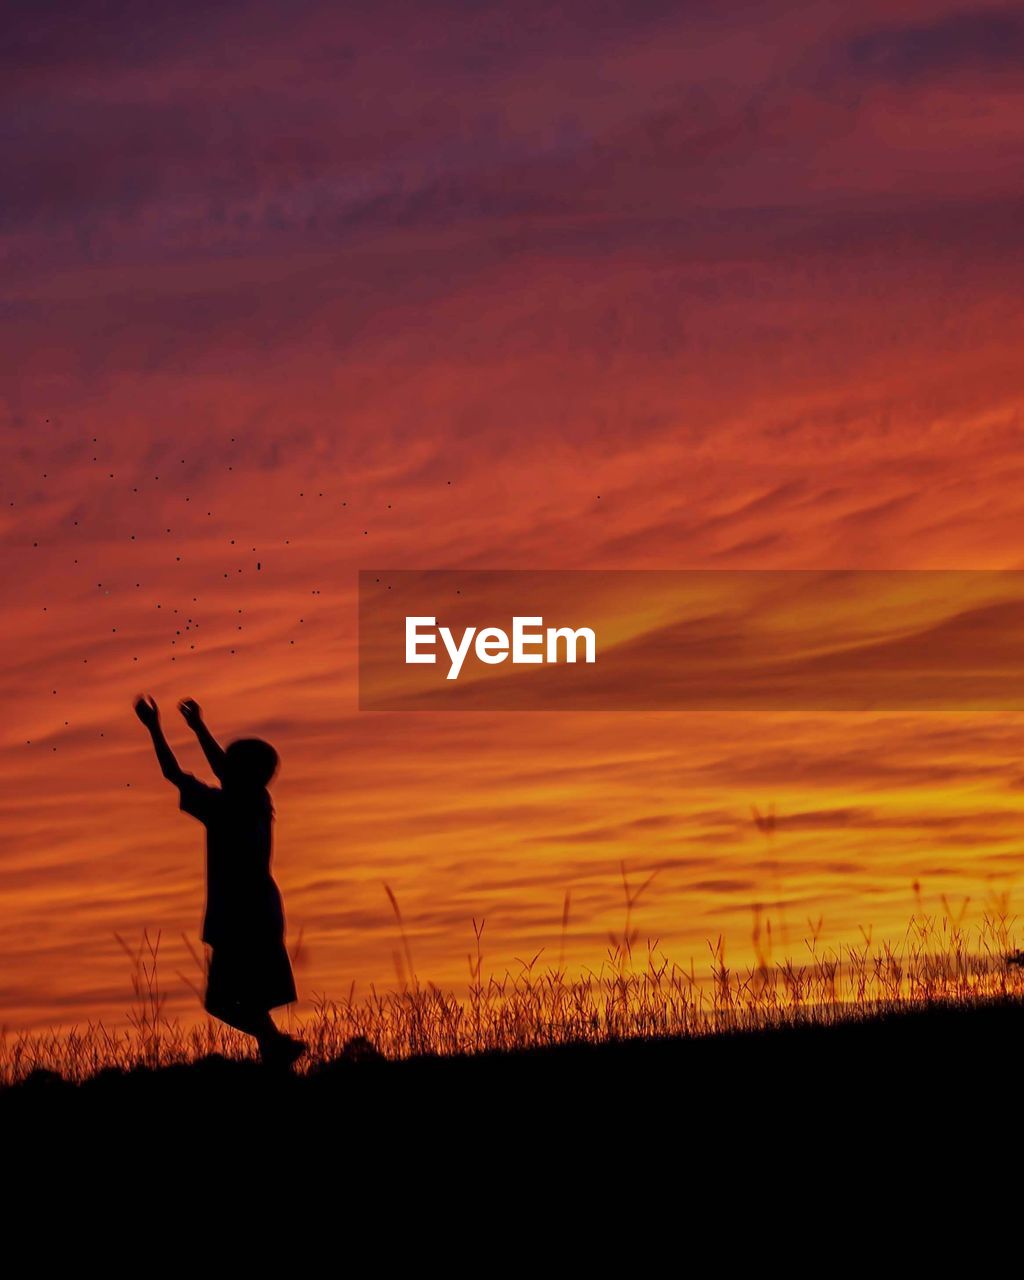 Silhouette boy standing on field against orange sky during sunset